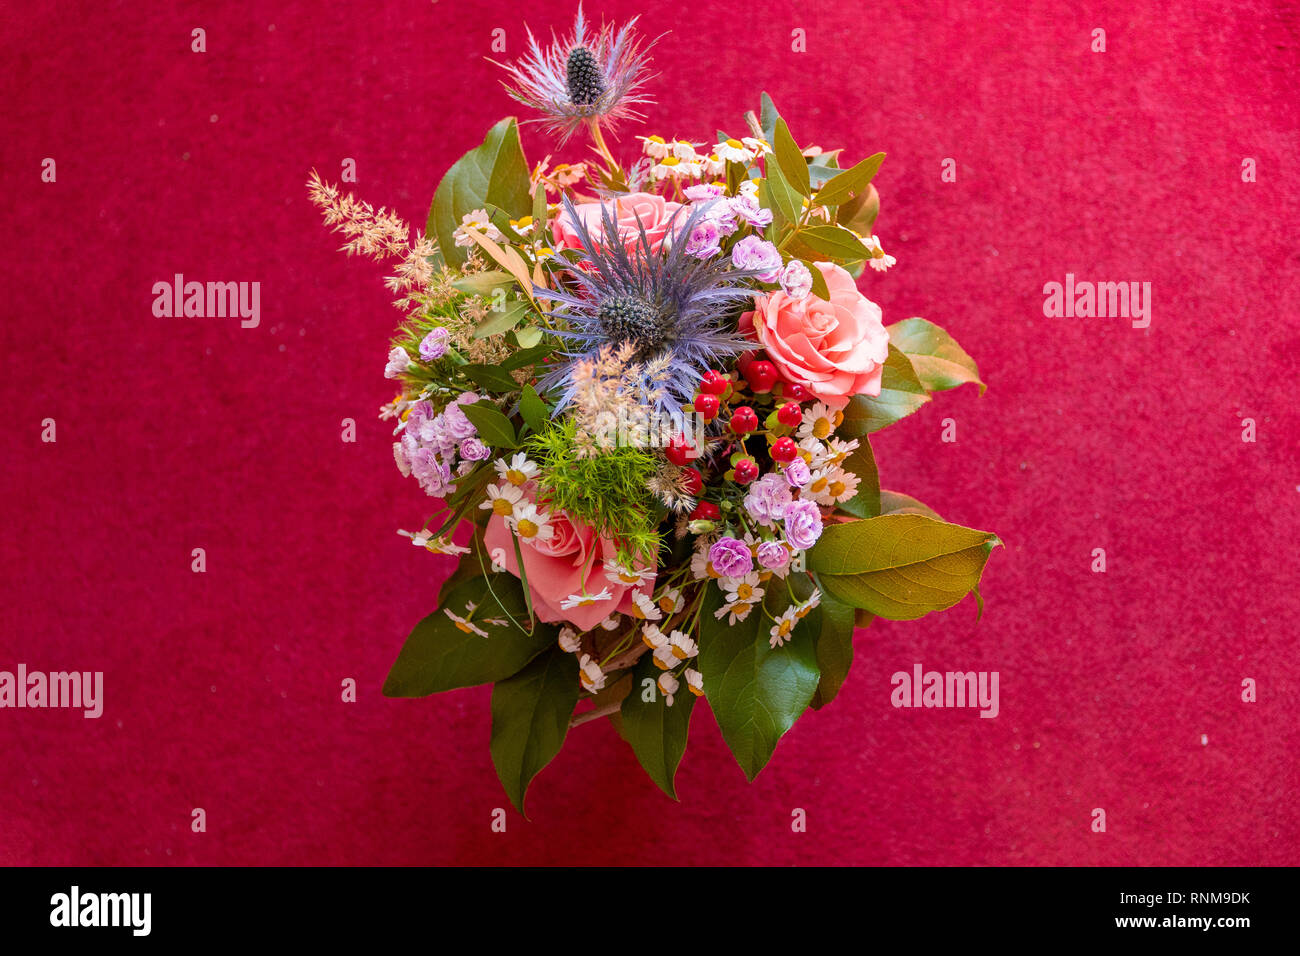 a bouquet of flowers Stock Photo